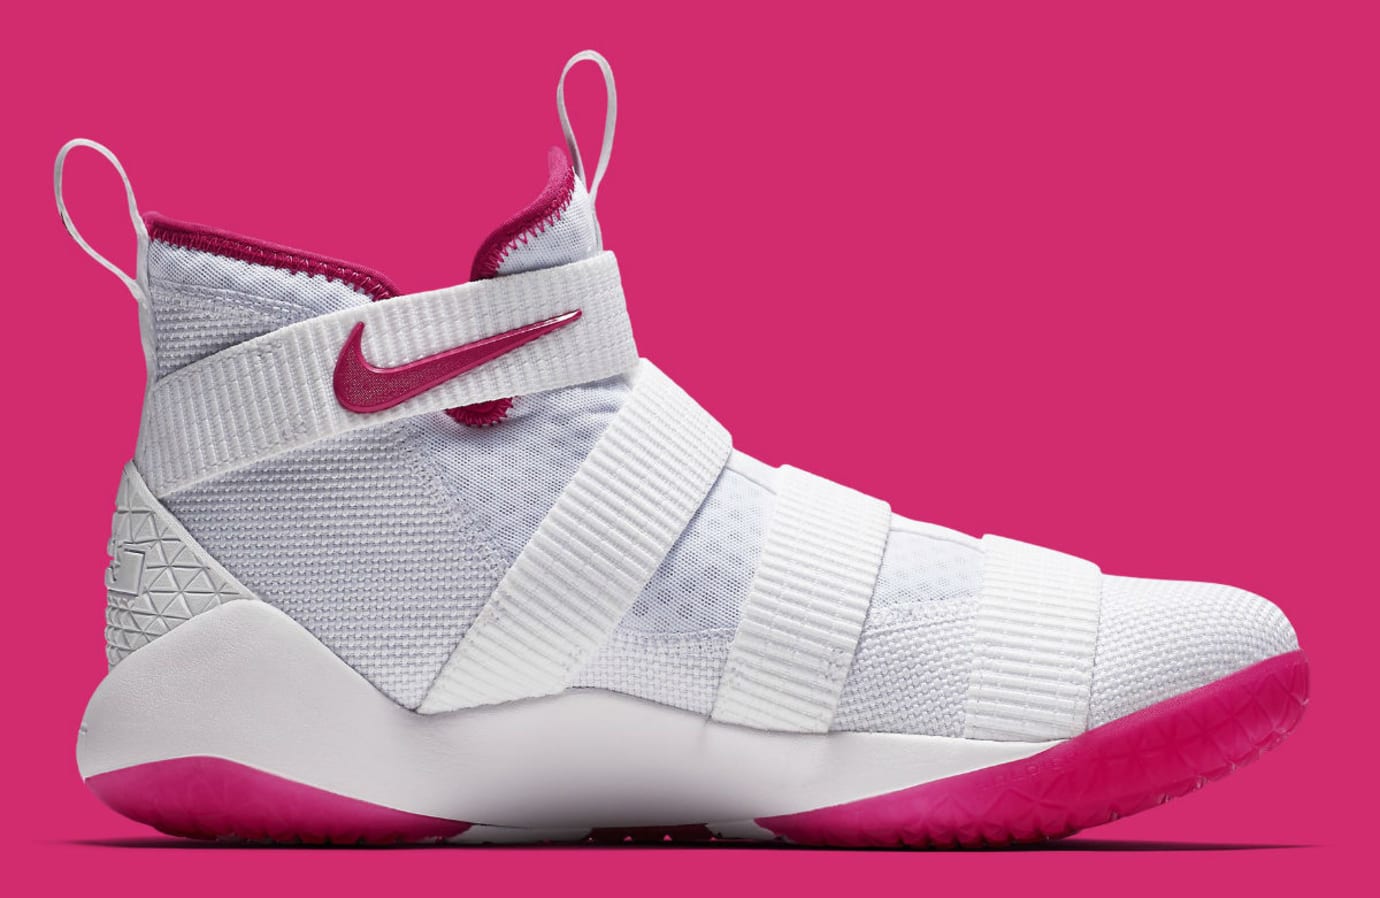 lebron soldier 11 breast cancer